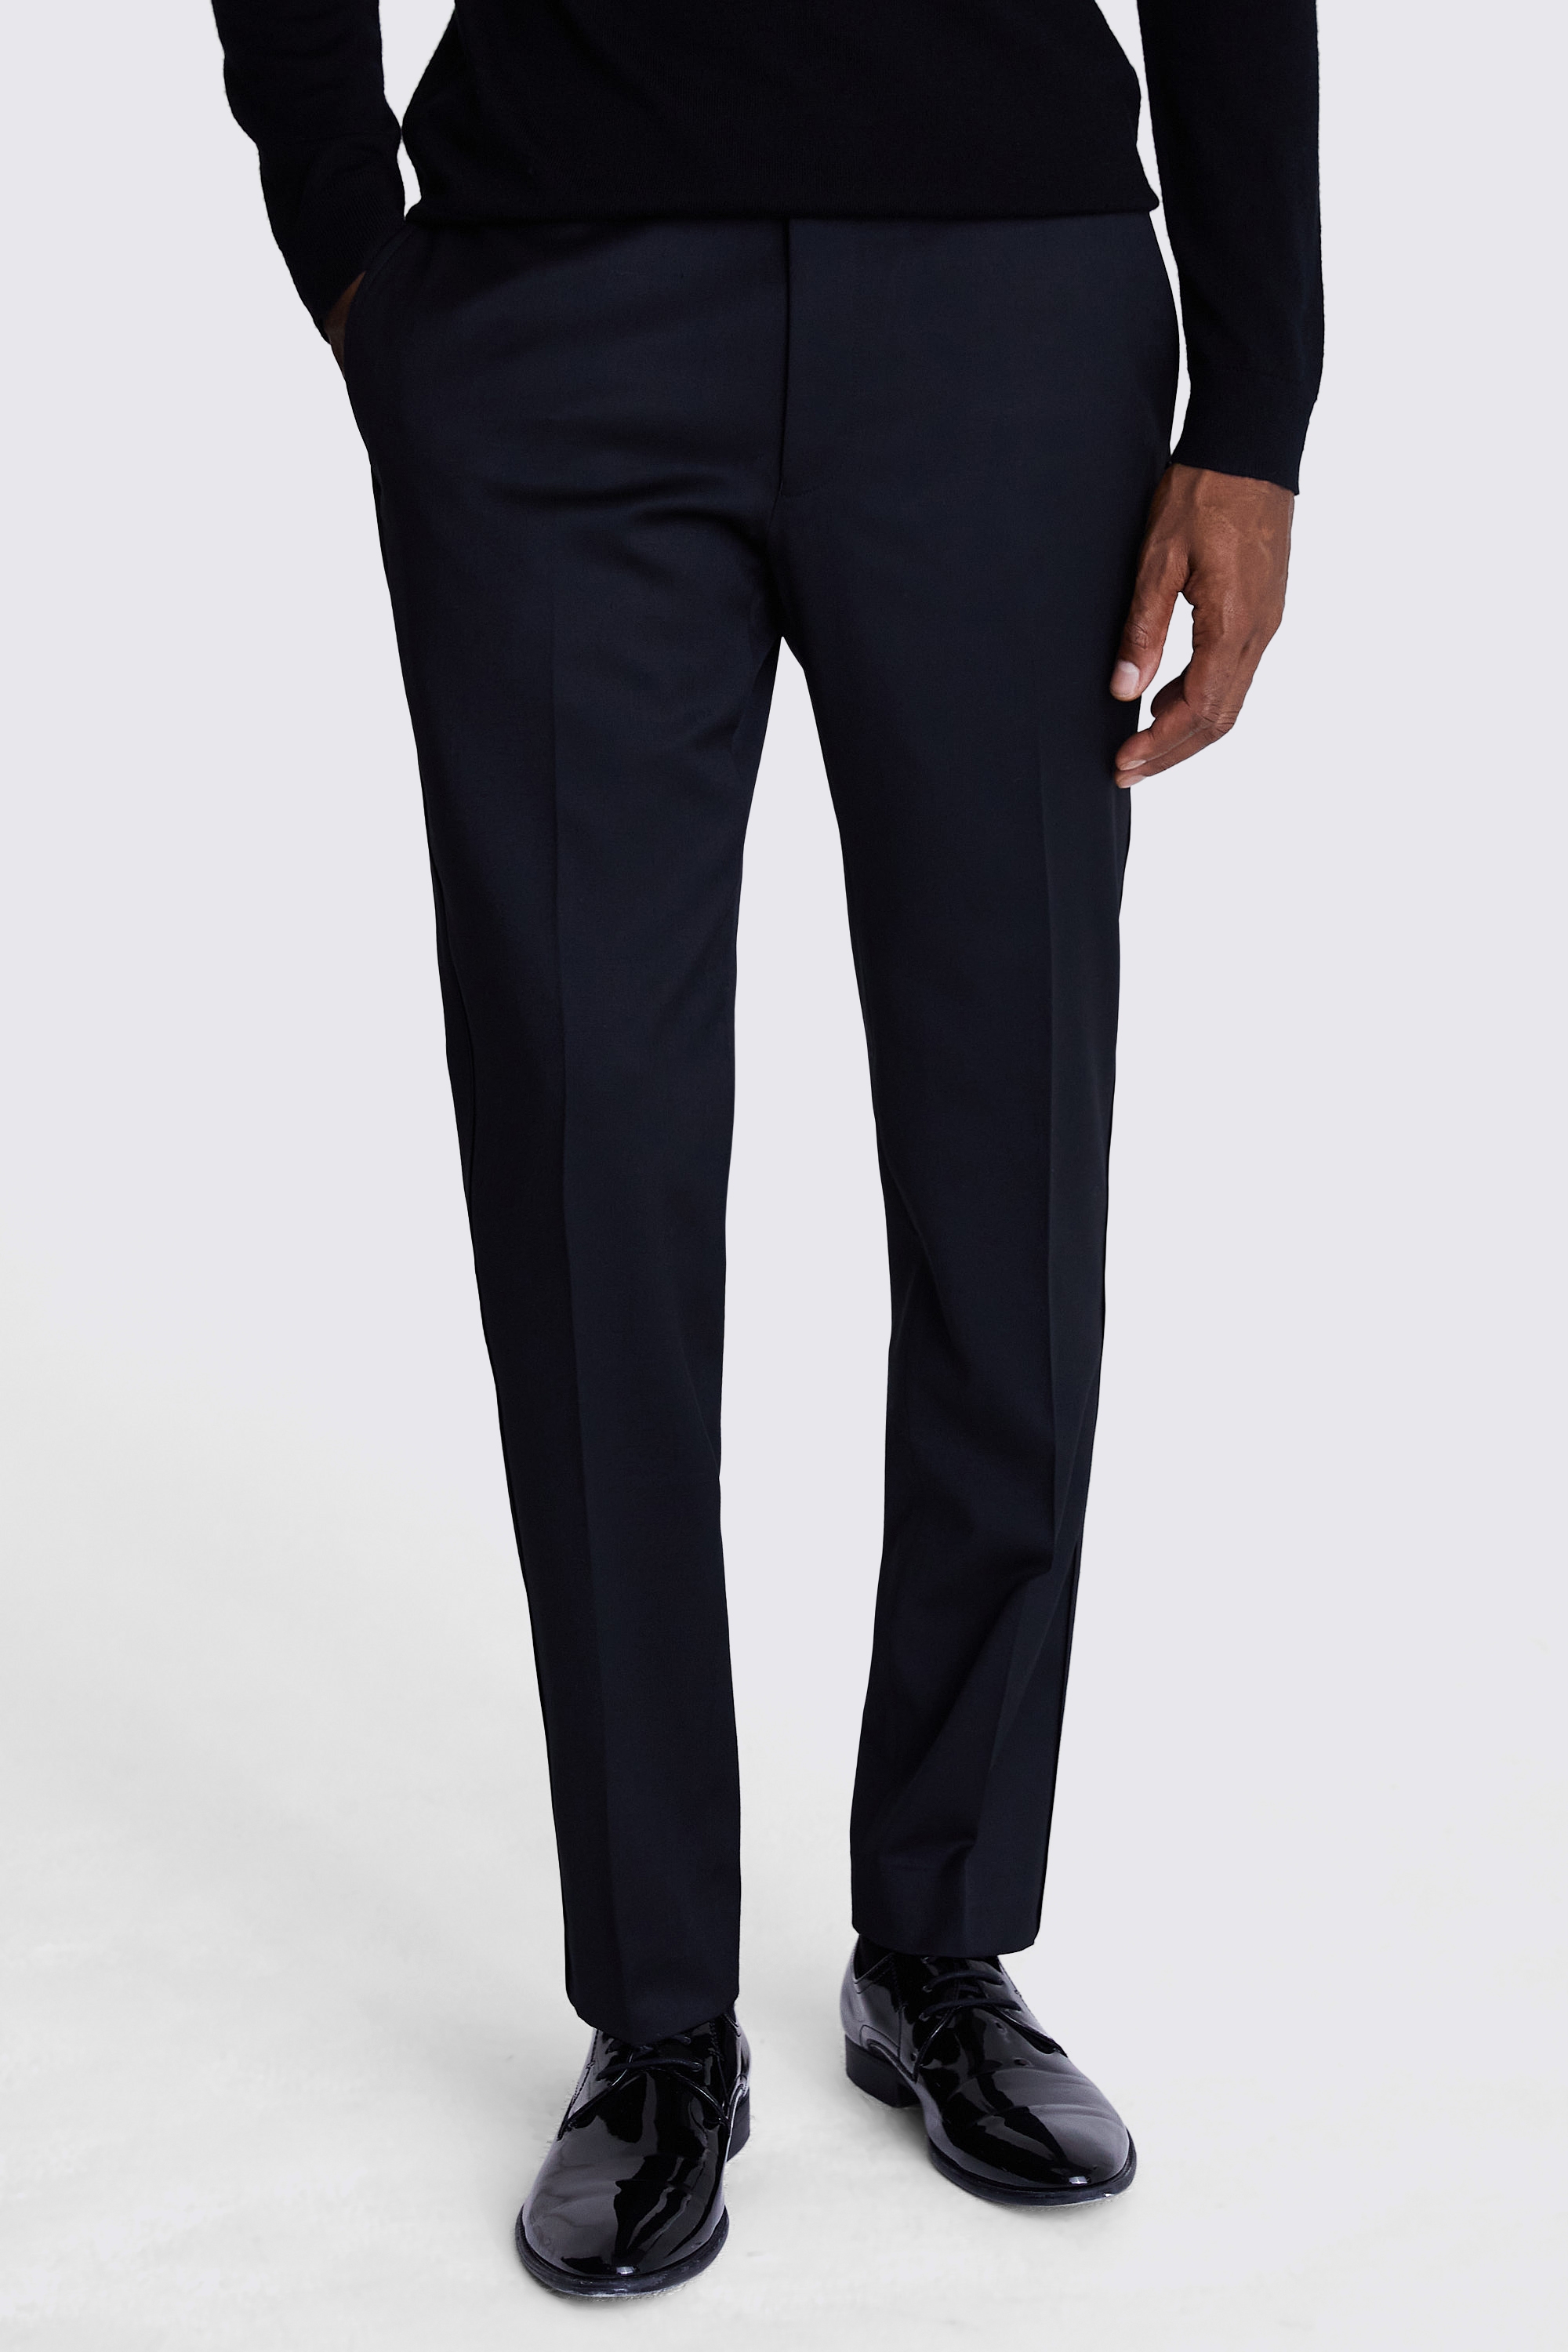 DKNY Slim Fit Black Dress Trousers | Buy Online at Moss